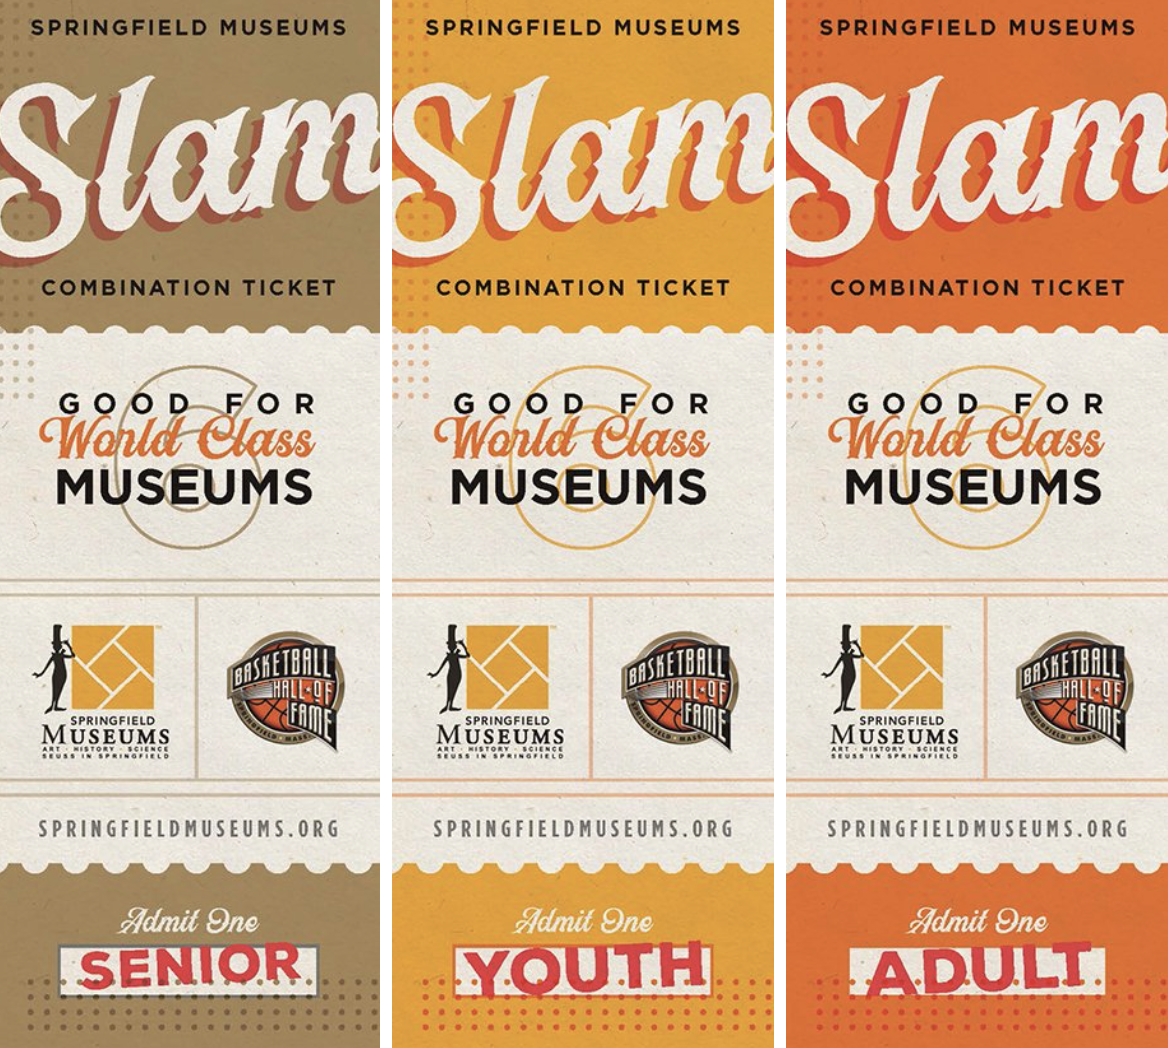 Springfield Slam Combined Ticket - Basketball Hall of Fame and Springfield Museums